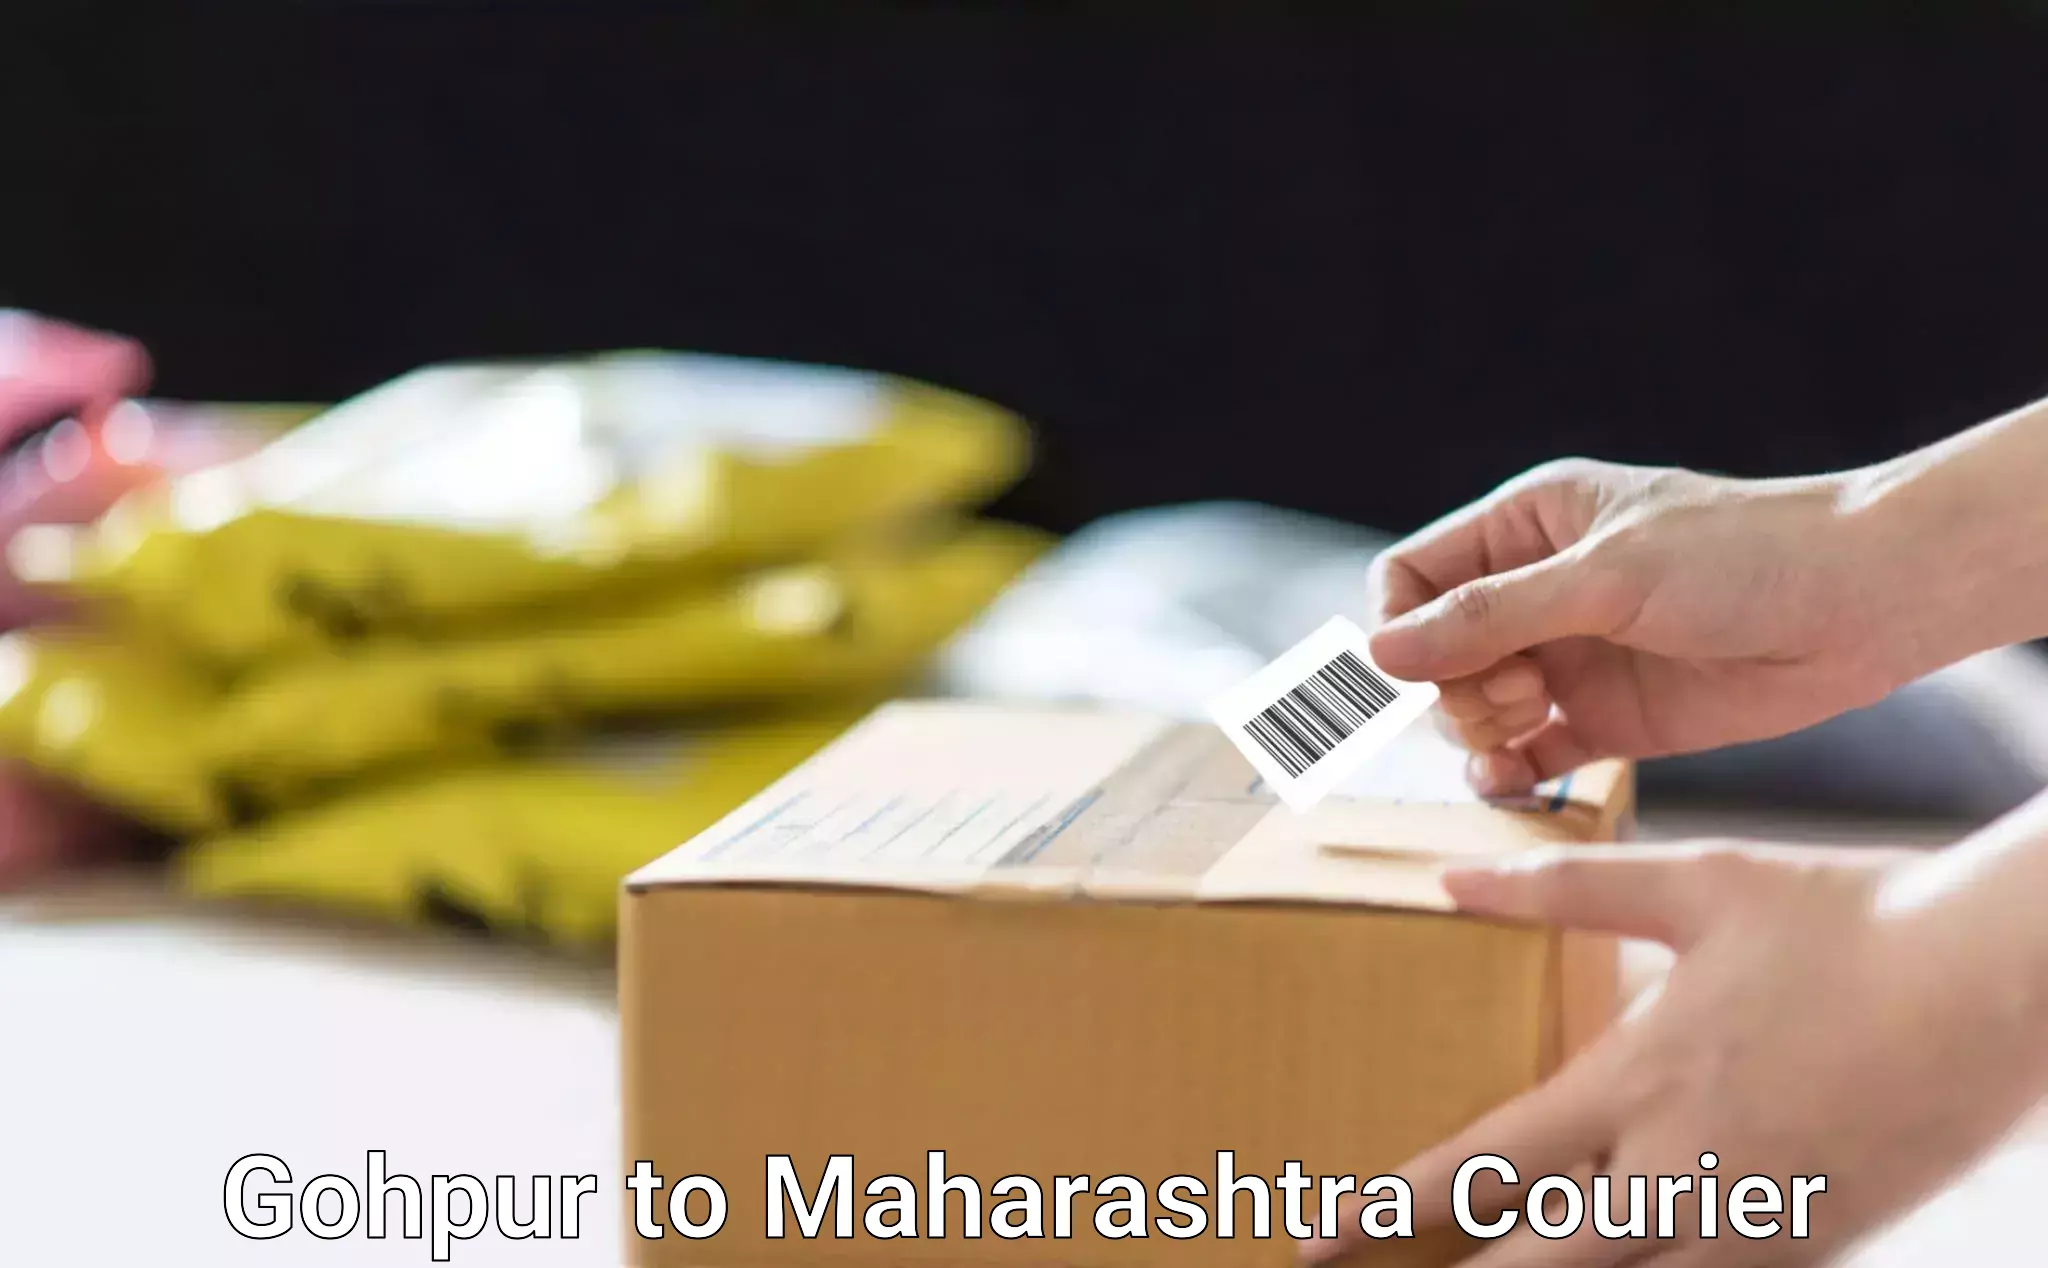 Fast shipping solutions Gohpur to Mhaswad